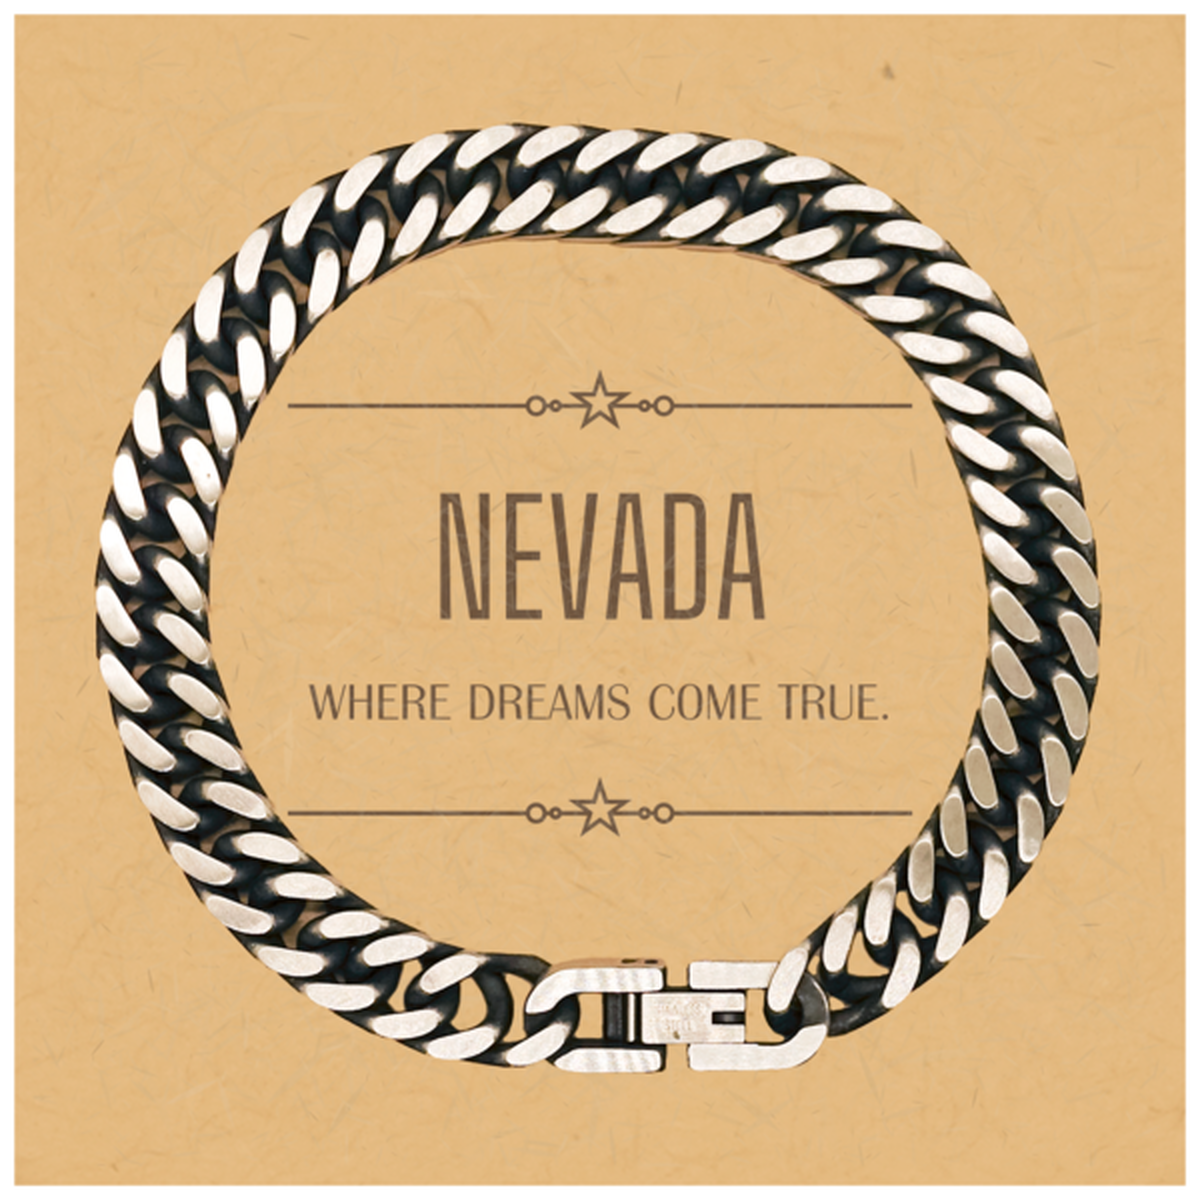 Love Nevada State Cuban Link Chain Bracelet, Nevada Where dreams come true, Birthday Christmas Inspirational Gifts For Nevada Men, Women, Friends